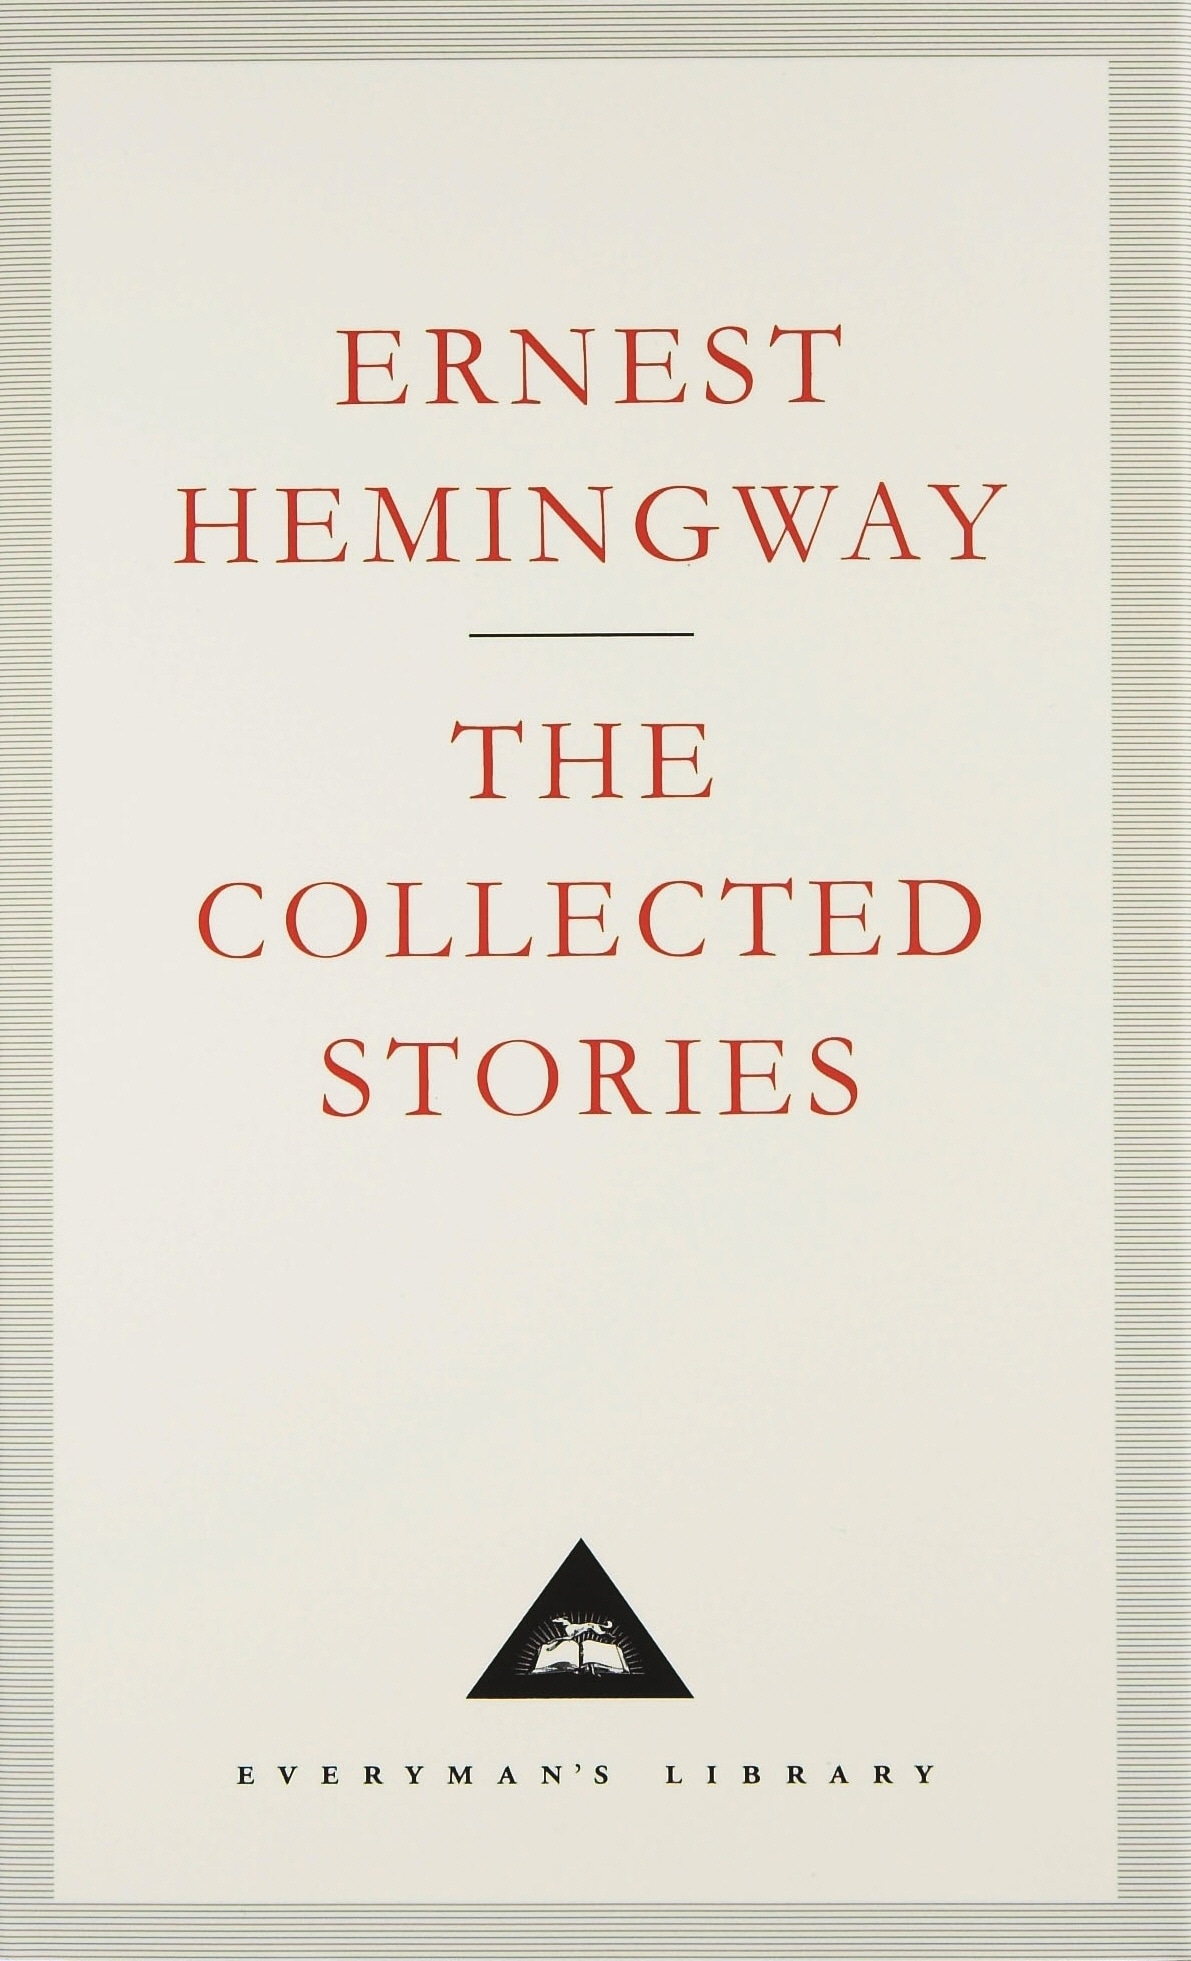 Book “The Collected Stories” by Ernest Hemingway — May 25, 1995